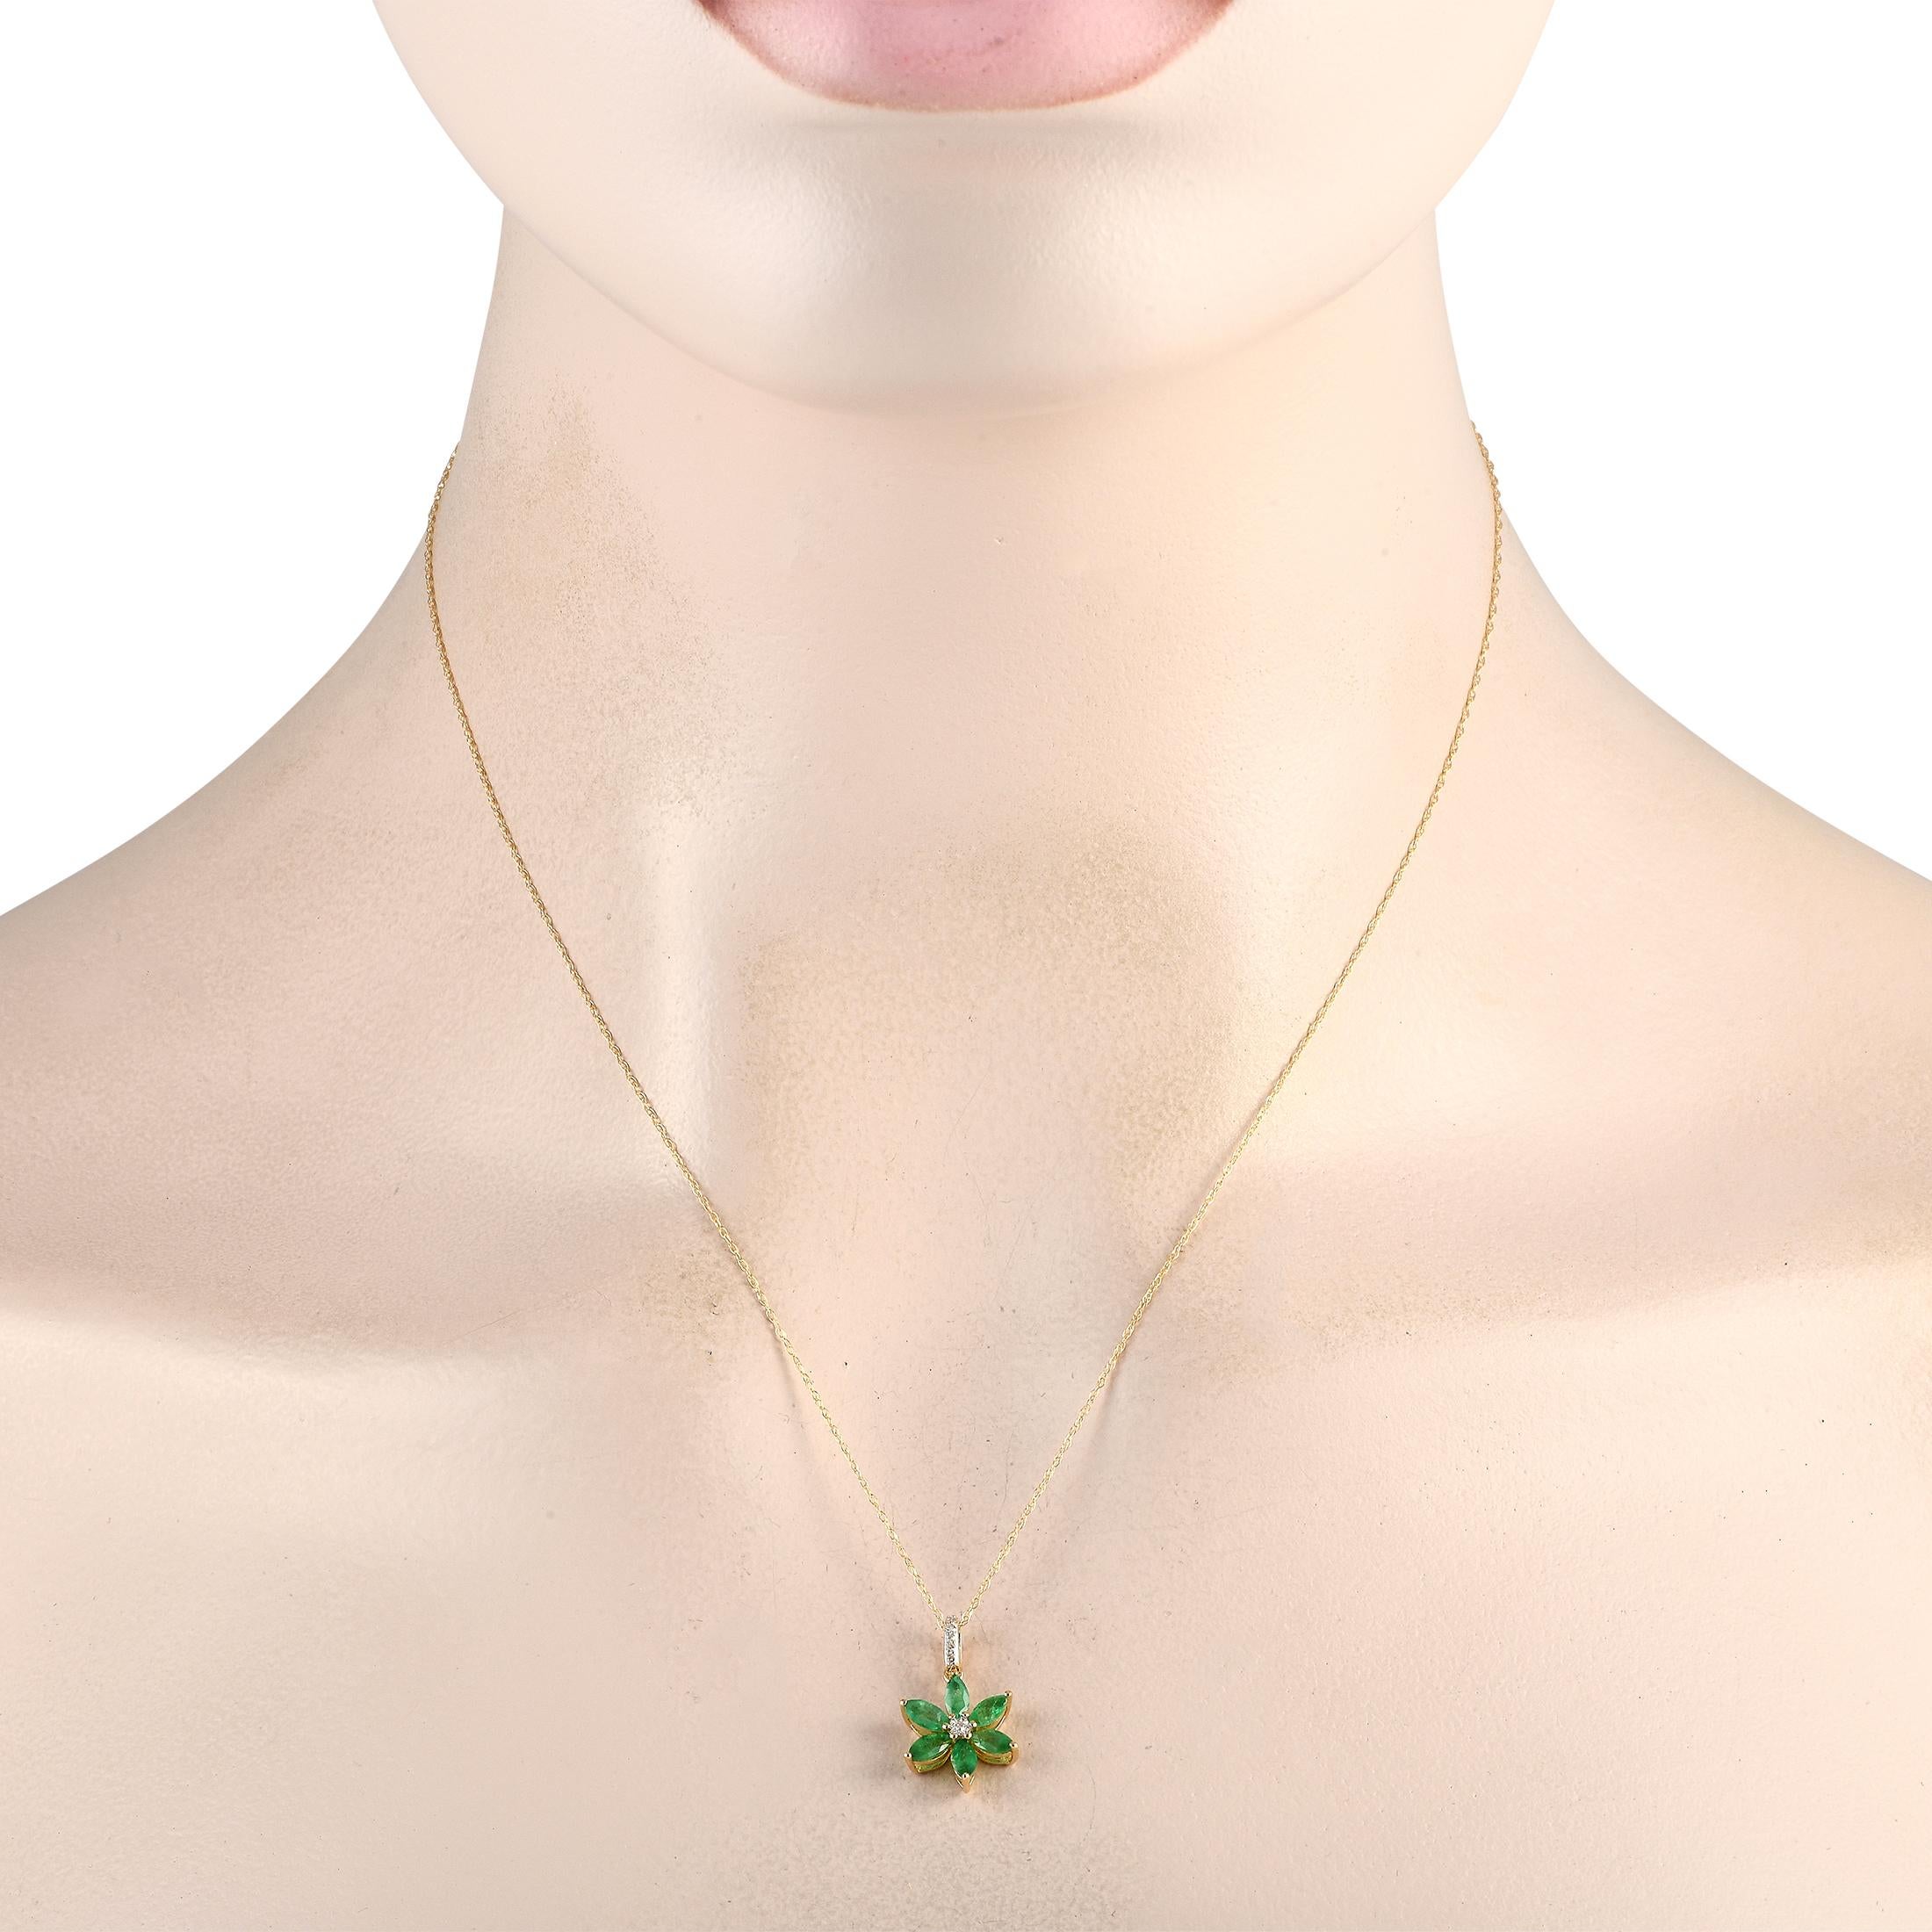 A floral shaped pendant measuring 0.75 long by 0.50 wide is suspended from an 18 chain on this charming necklace. Crafted from 14K Yellow Gold, the pendant comes to life thanks to captivating Emerald petals and Diamonds with a total weight of 0.01